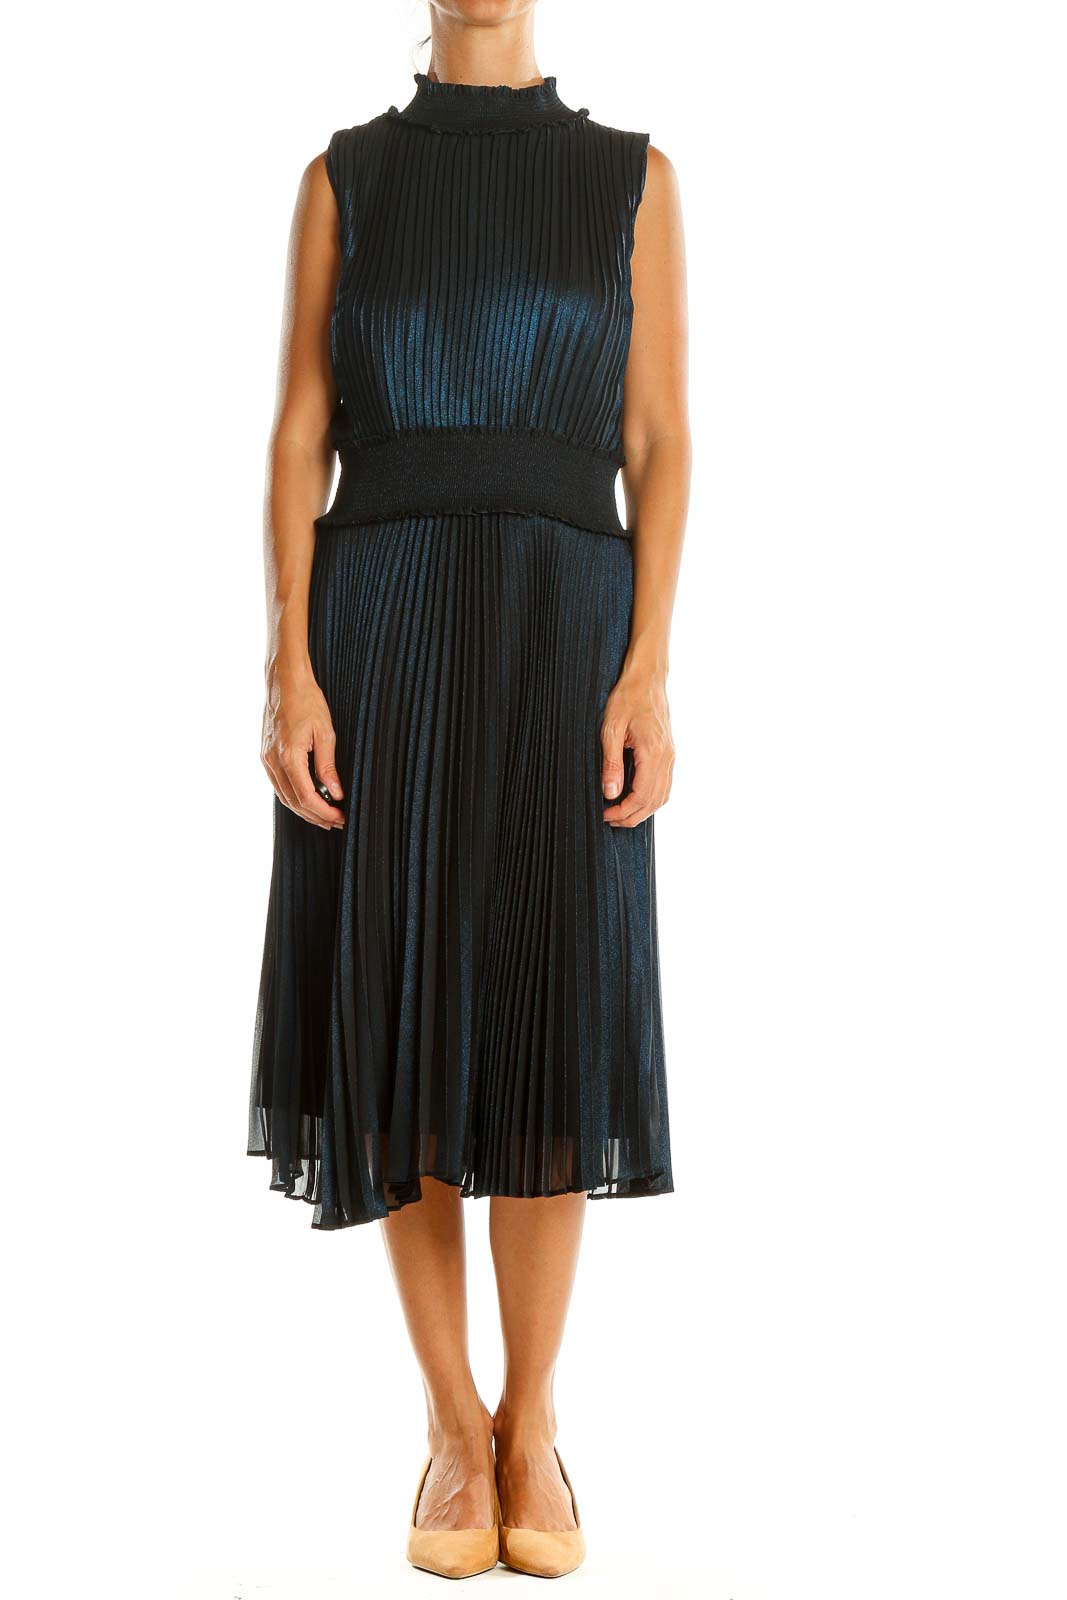 Blue Pleated Classic Fit & Flare Dress Front